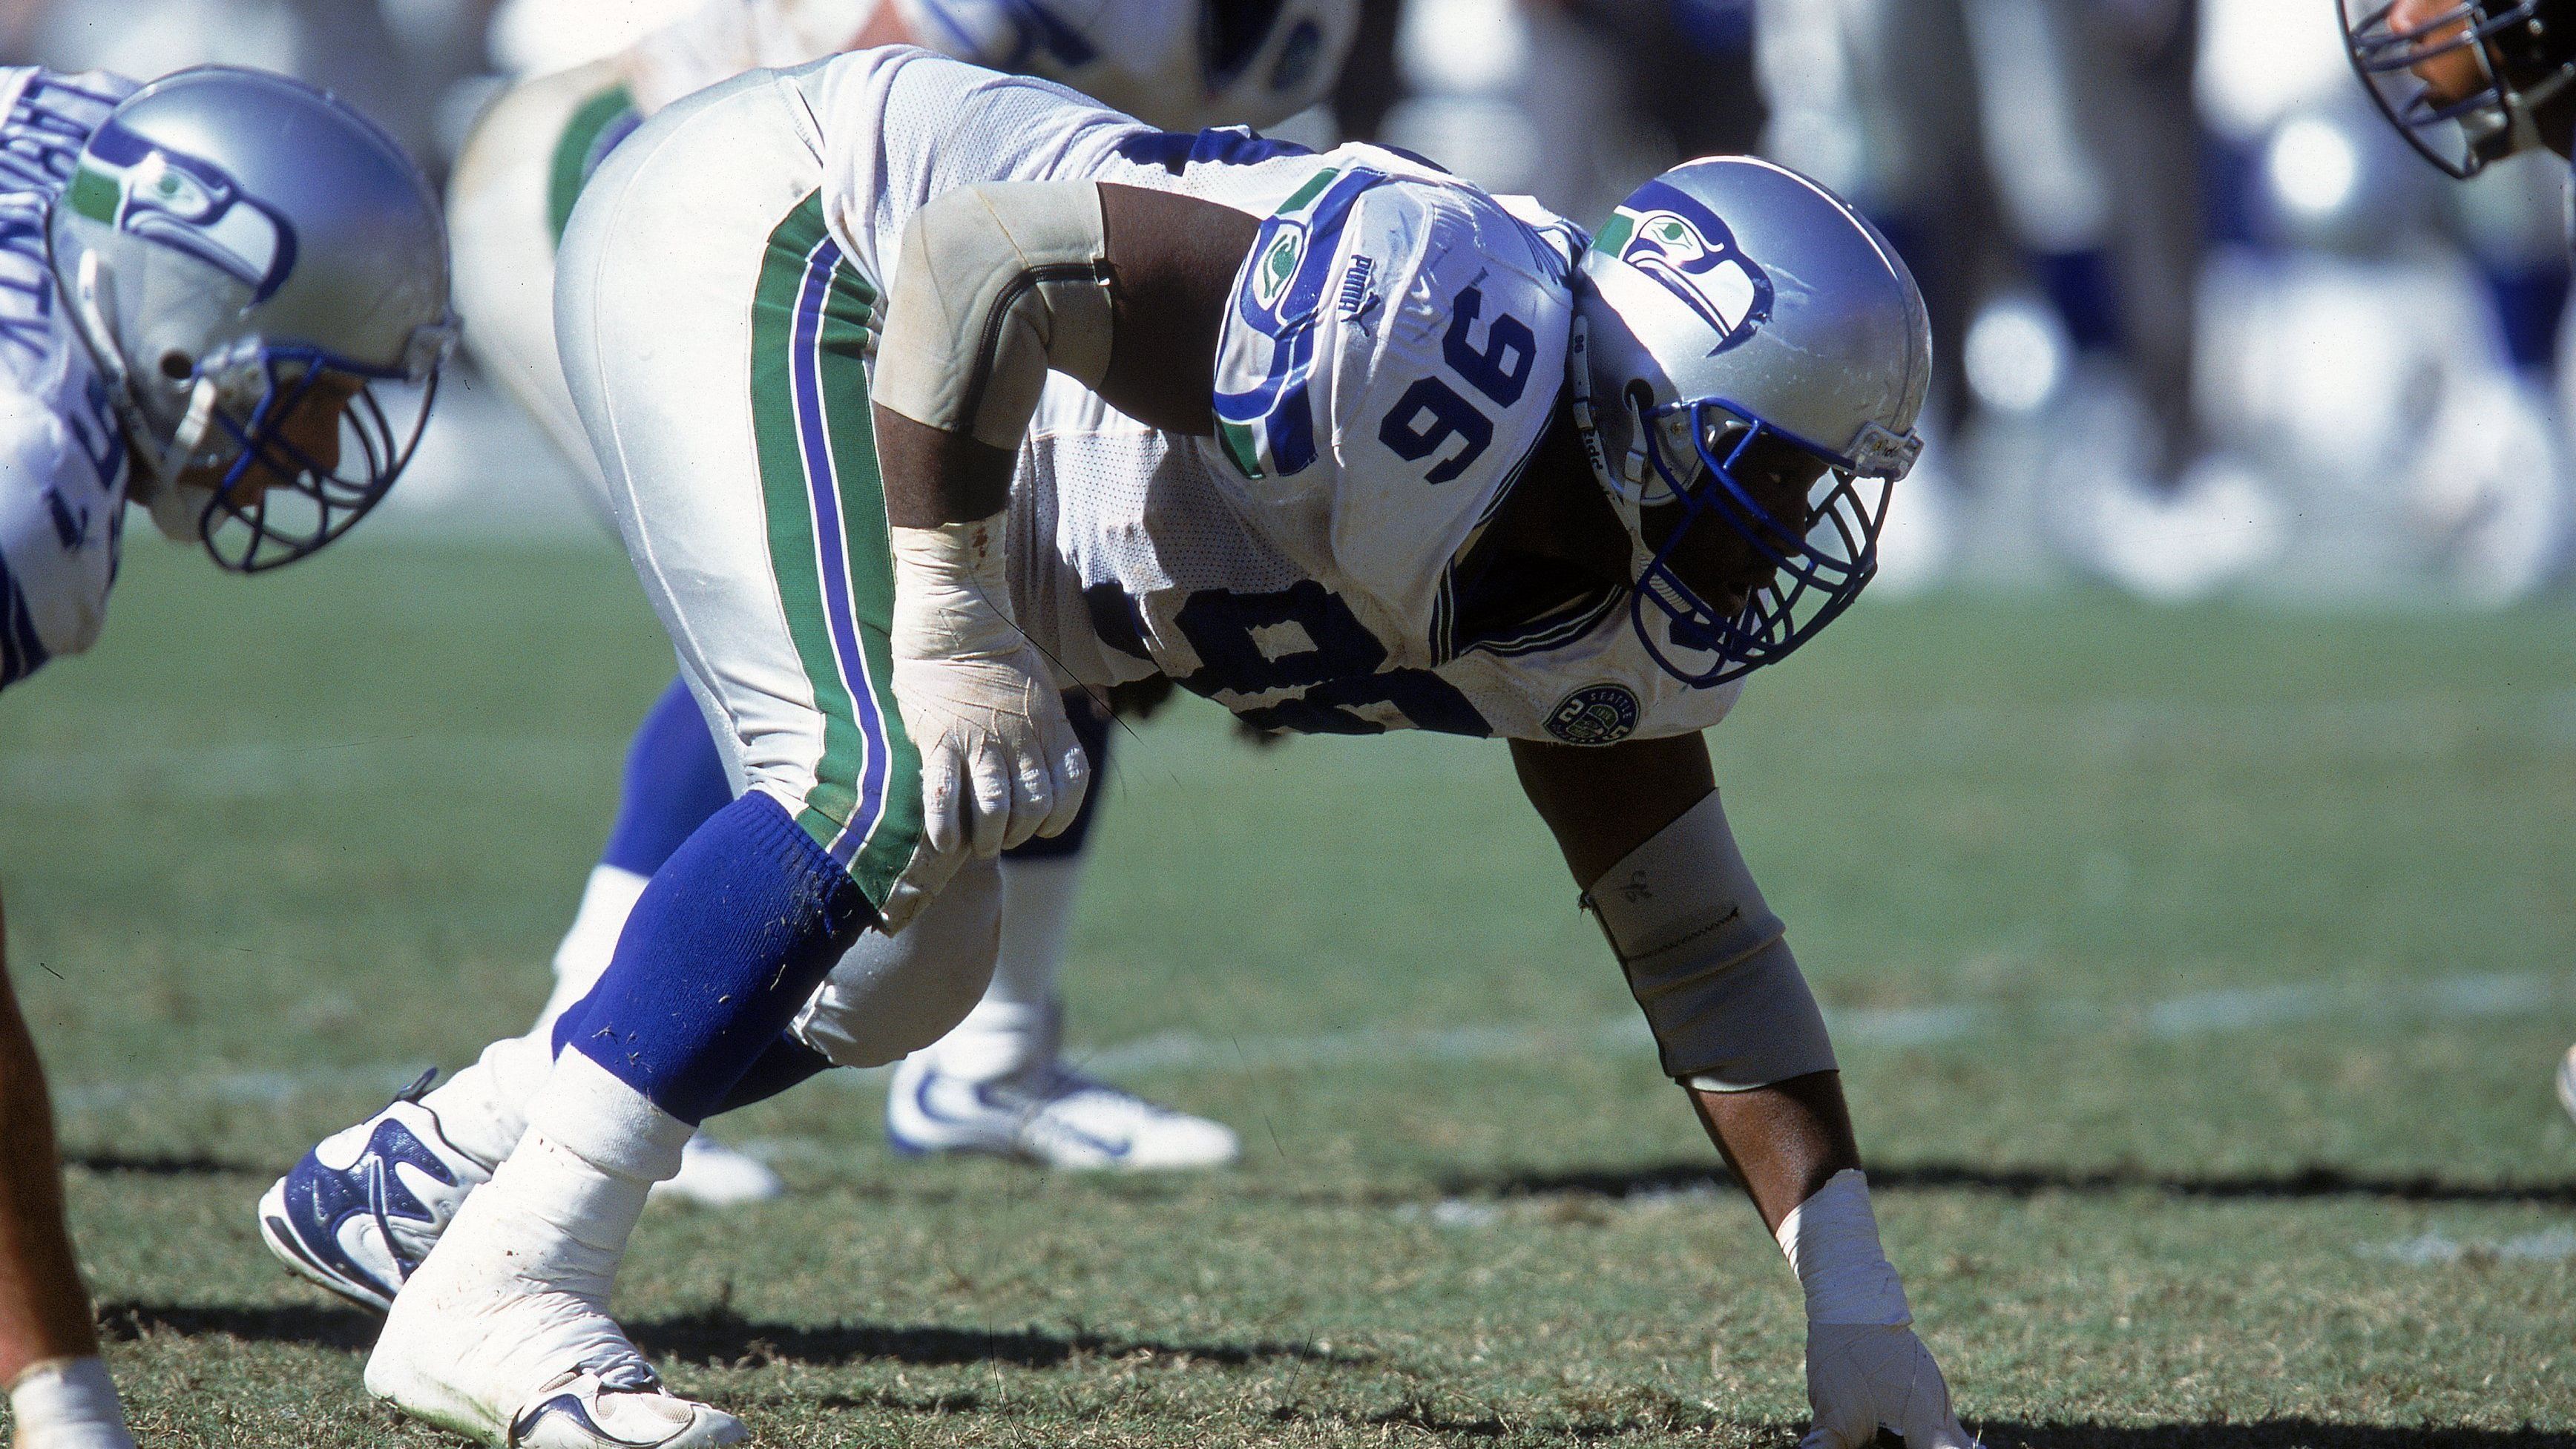 <strong>96: Cortez Kennedy&nbsp;<br></strong>Team: Seattle Seahawks<br>Position: Defensive Tackle<br>Erfolge: Pro Football Hall of Famer, NFL Defensive Player of the Year 1992, zweimaliger Super-Bowl-Champion, Super-Bowl-MVP 1986, dreimaliger First Team All-Pro, achtmaliger Pro Bowler